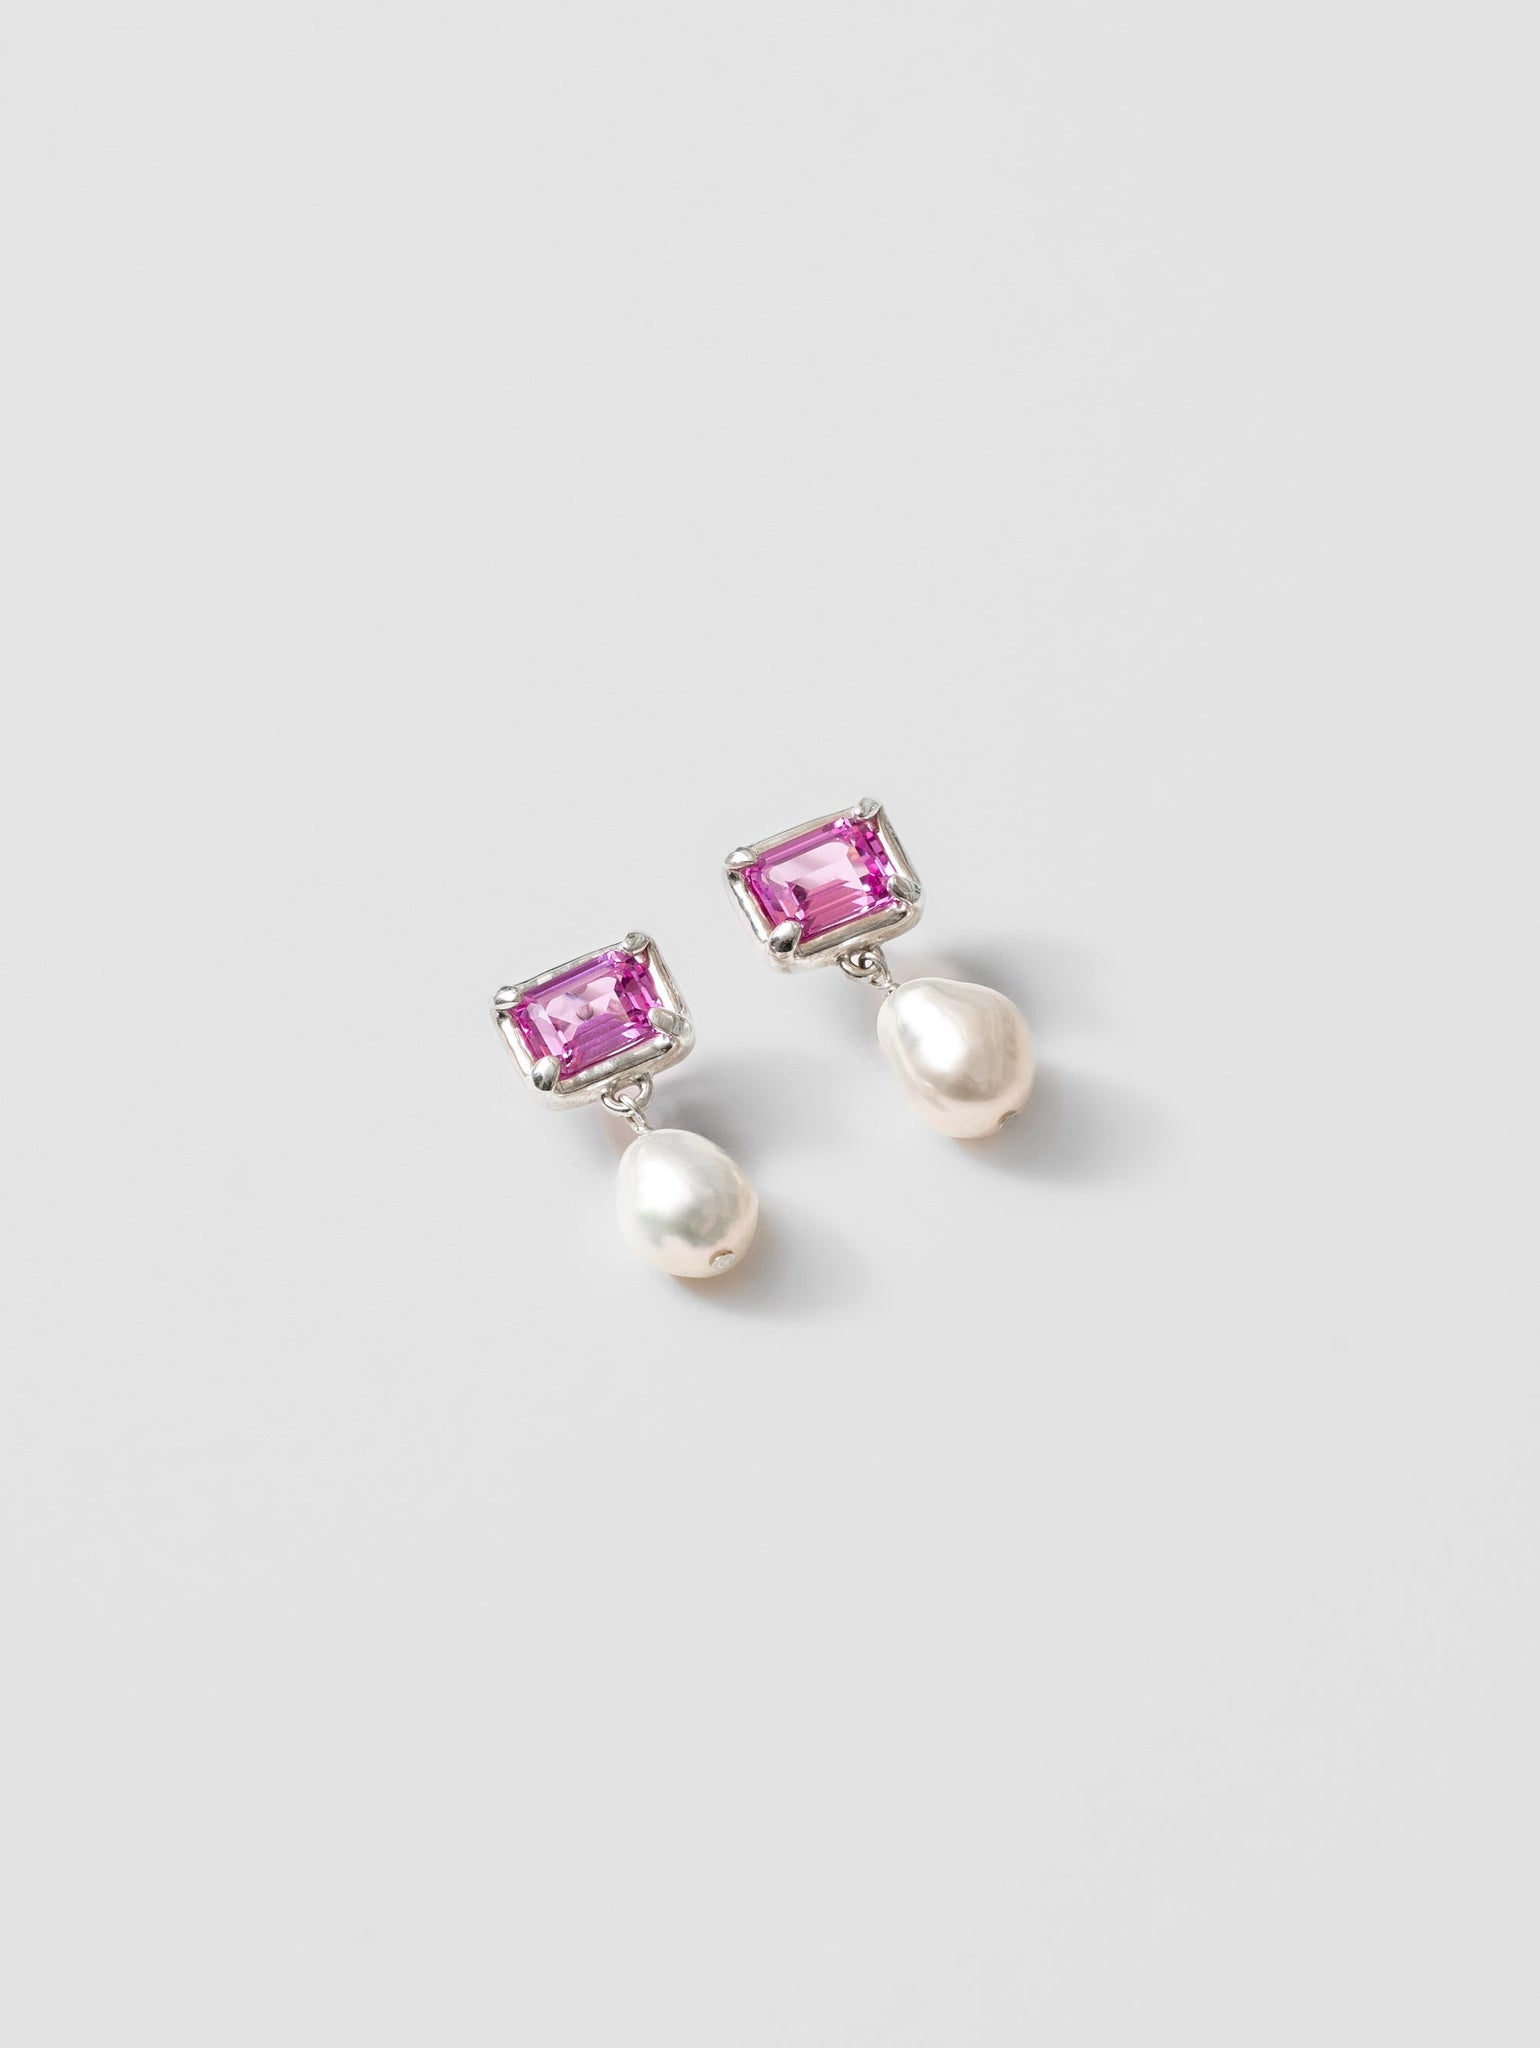 Wolf Circus Pink Sapphire & Pearl Drop Earrings Sterling Silver | Sophie Earrings in Pink and Sterling Silver-Earrings-wolfcircus.com